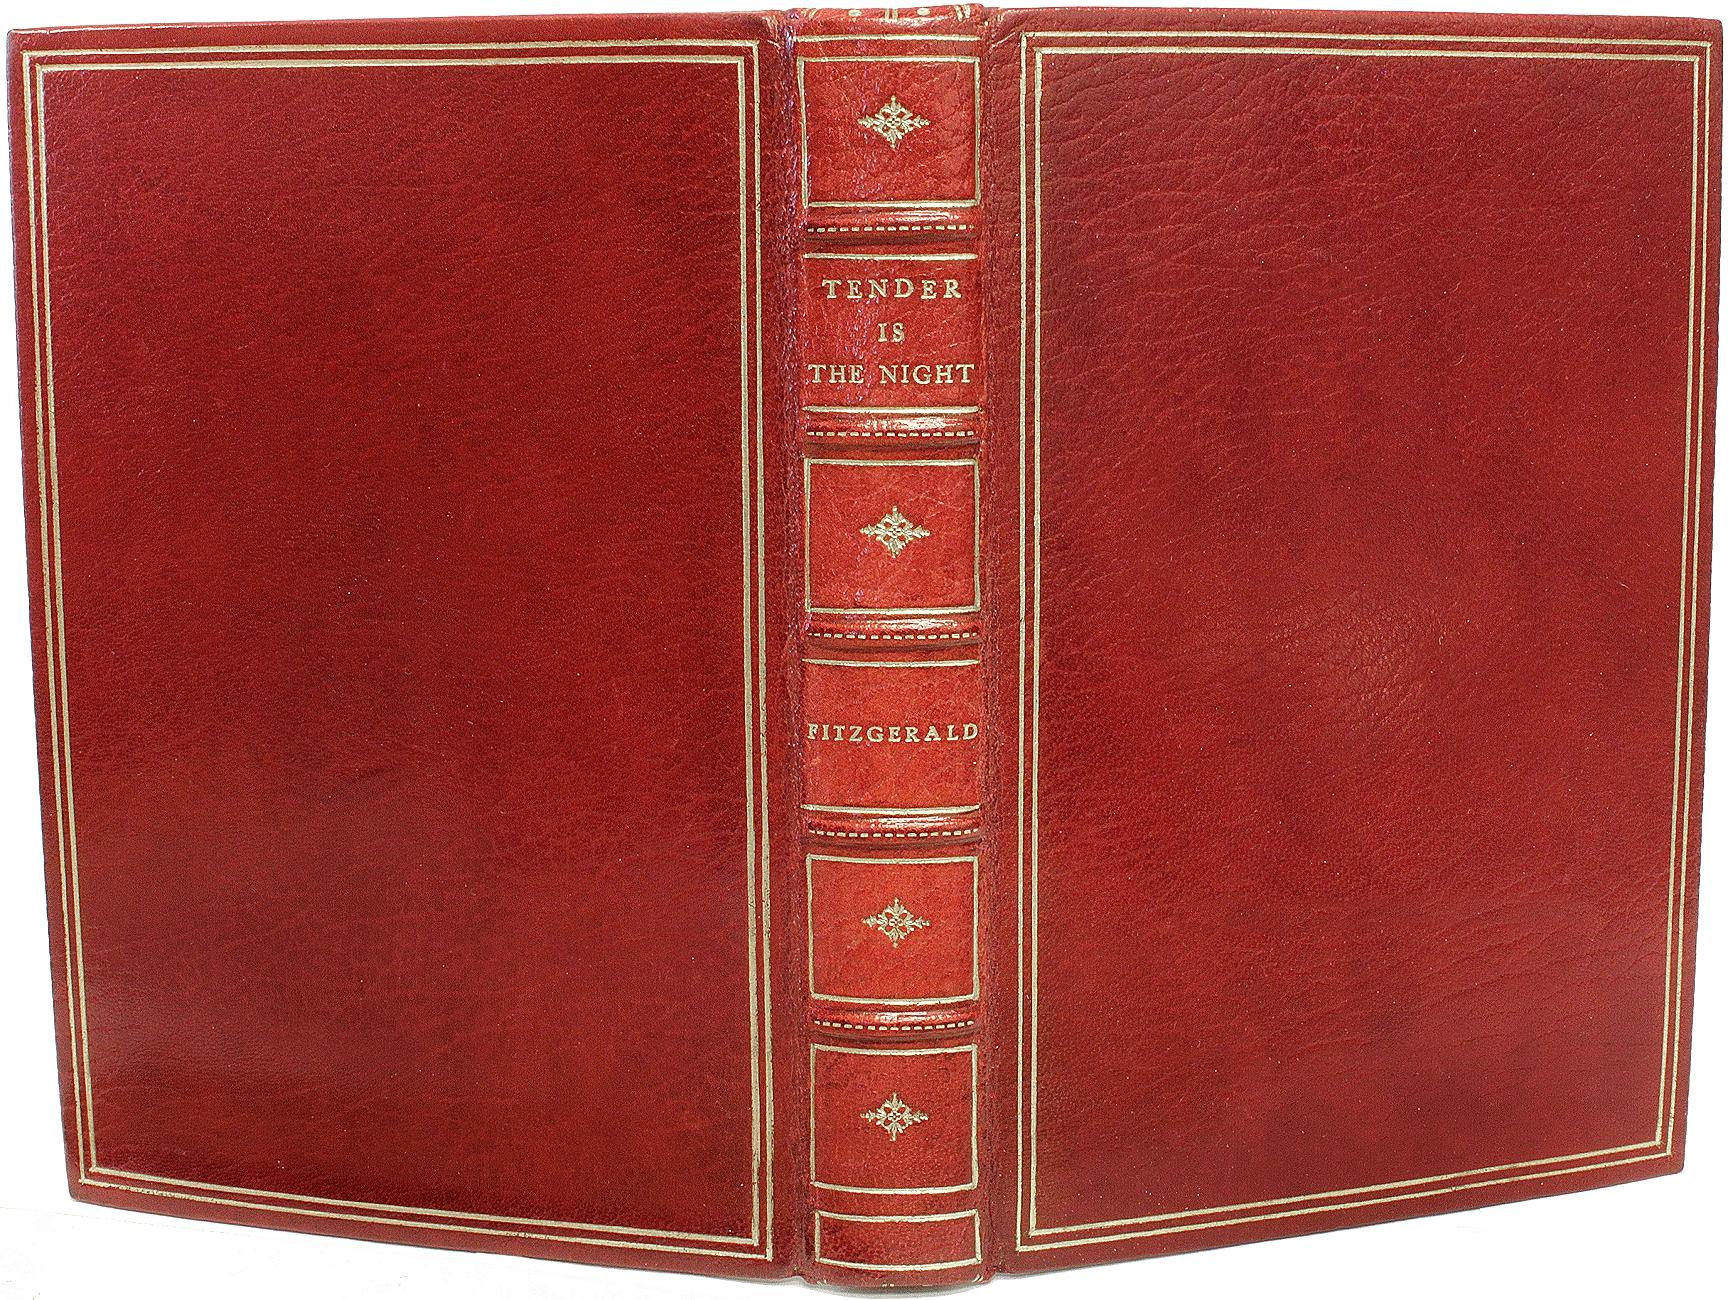 American F. Scott Fitzgerald. Tender Is the Night - in a Fine Full Leather Binding!